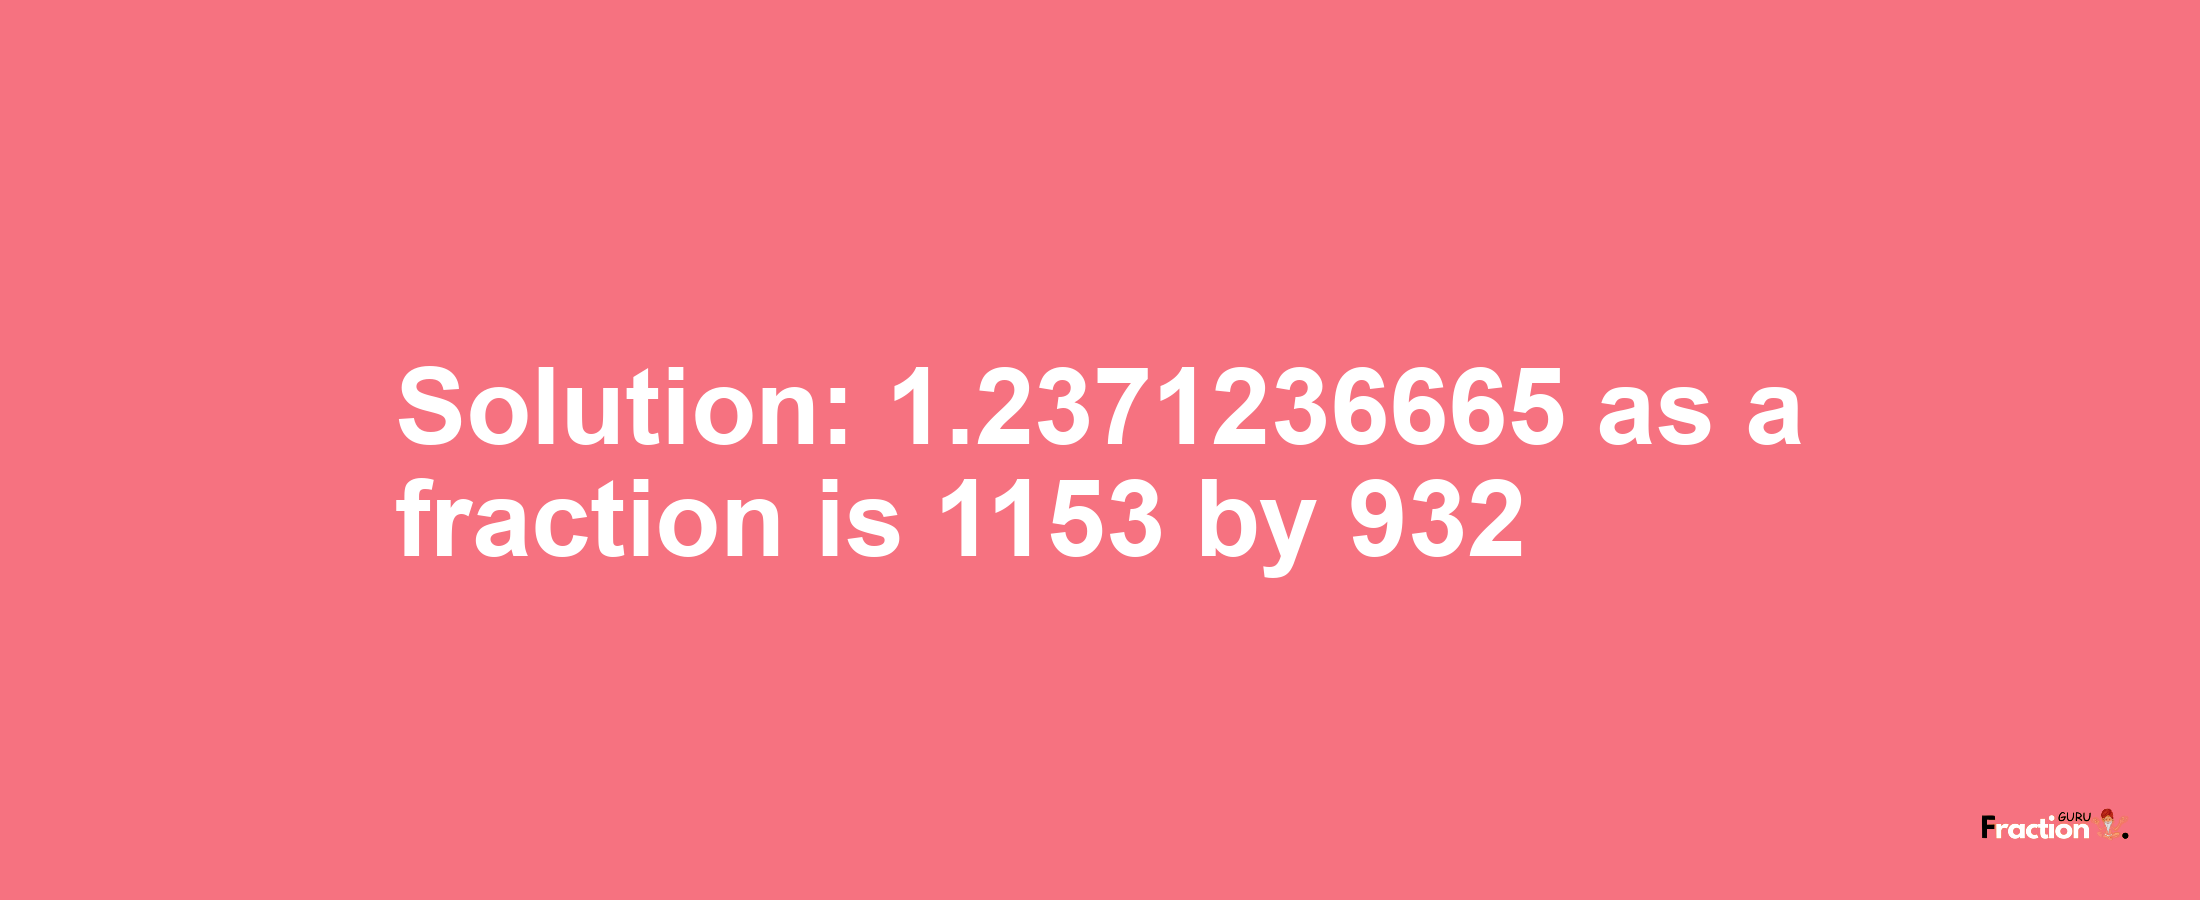 Solution:1.2371236665 as a fraction is 1153/932